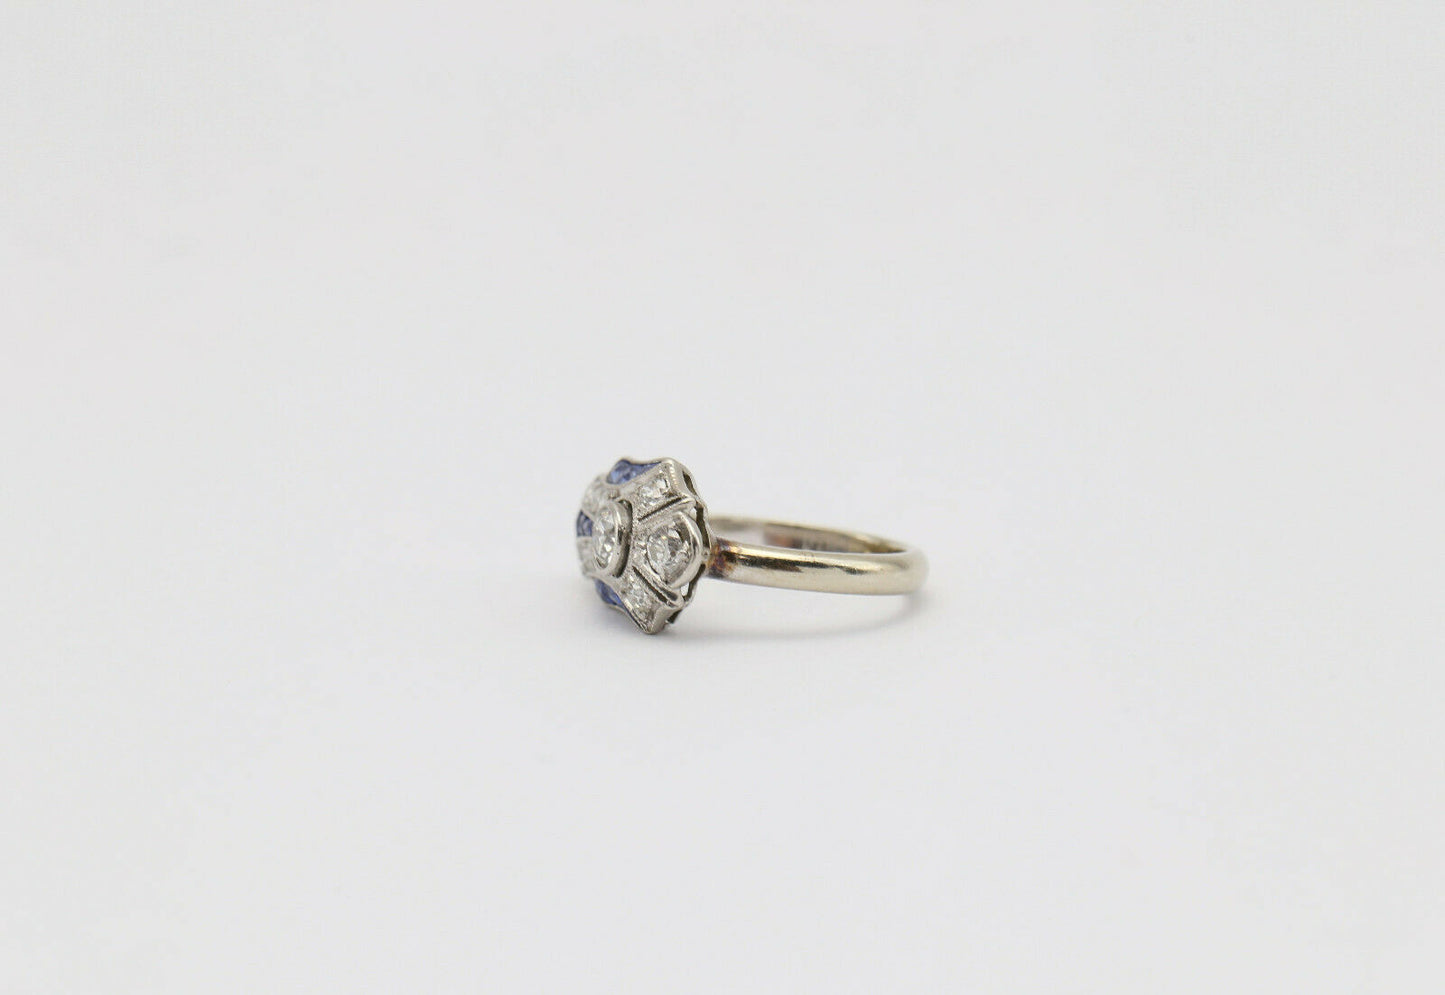 Victorian 14k White Gold Ladies Sapphire & Diamond Pinky Ring, Size 2.75 (up to size 8) - 3.2g